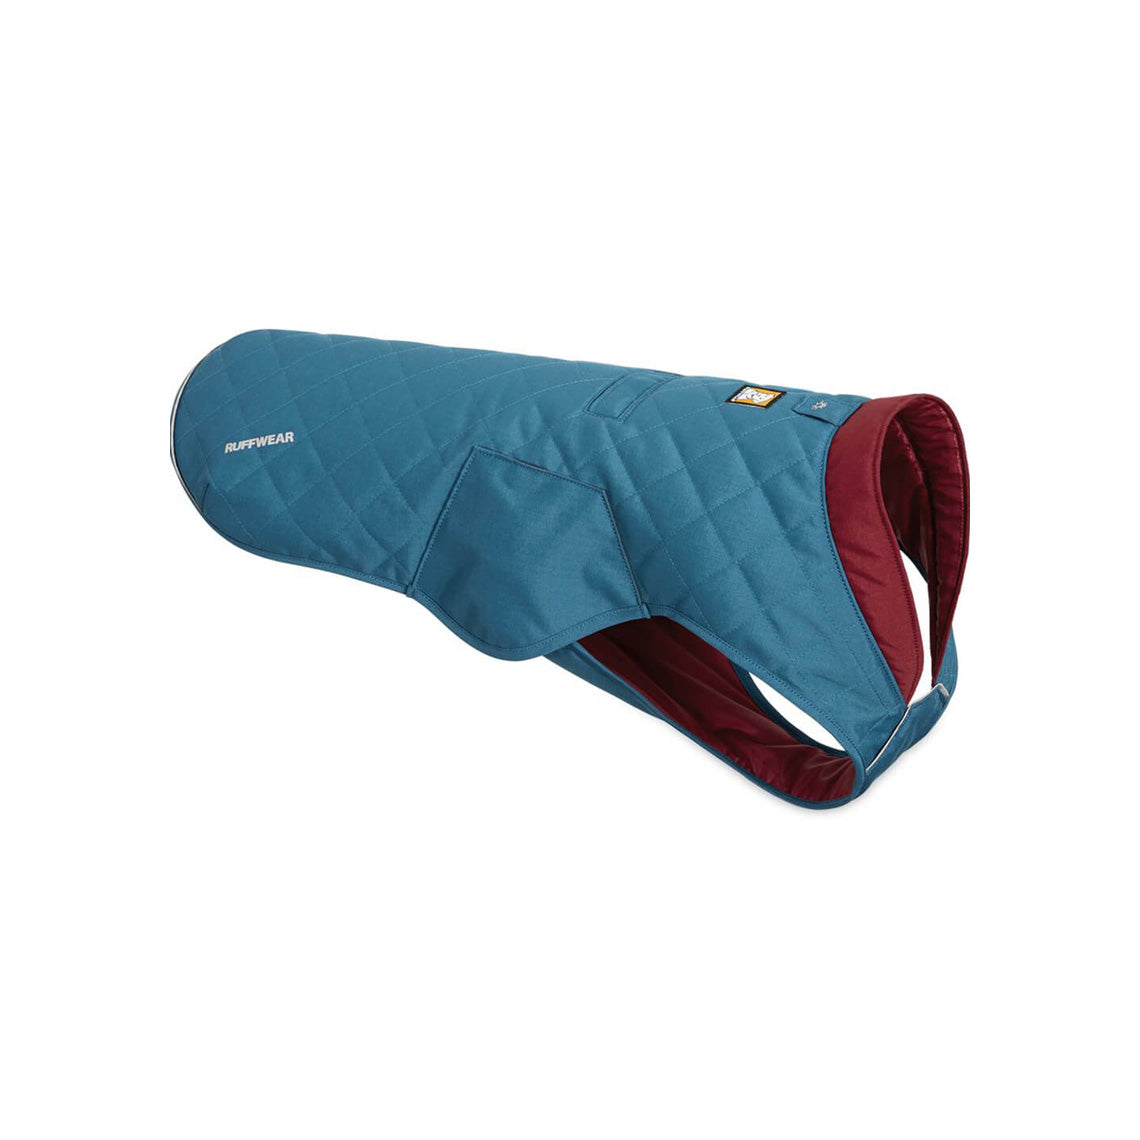 Ruffwear Stumptown Quilted Urban Jacket for Dogs